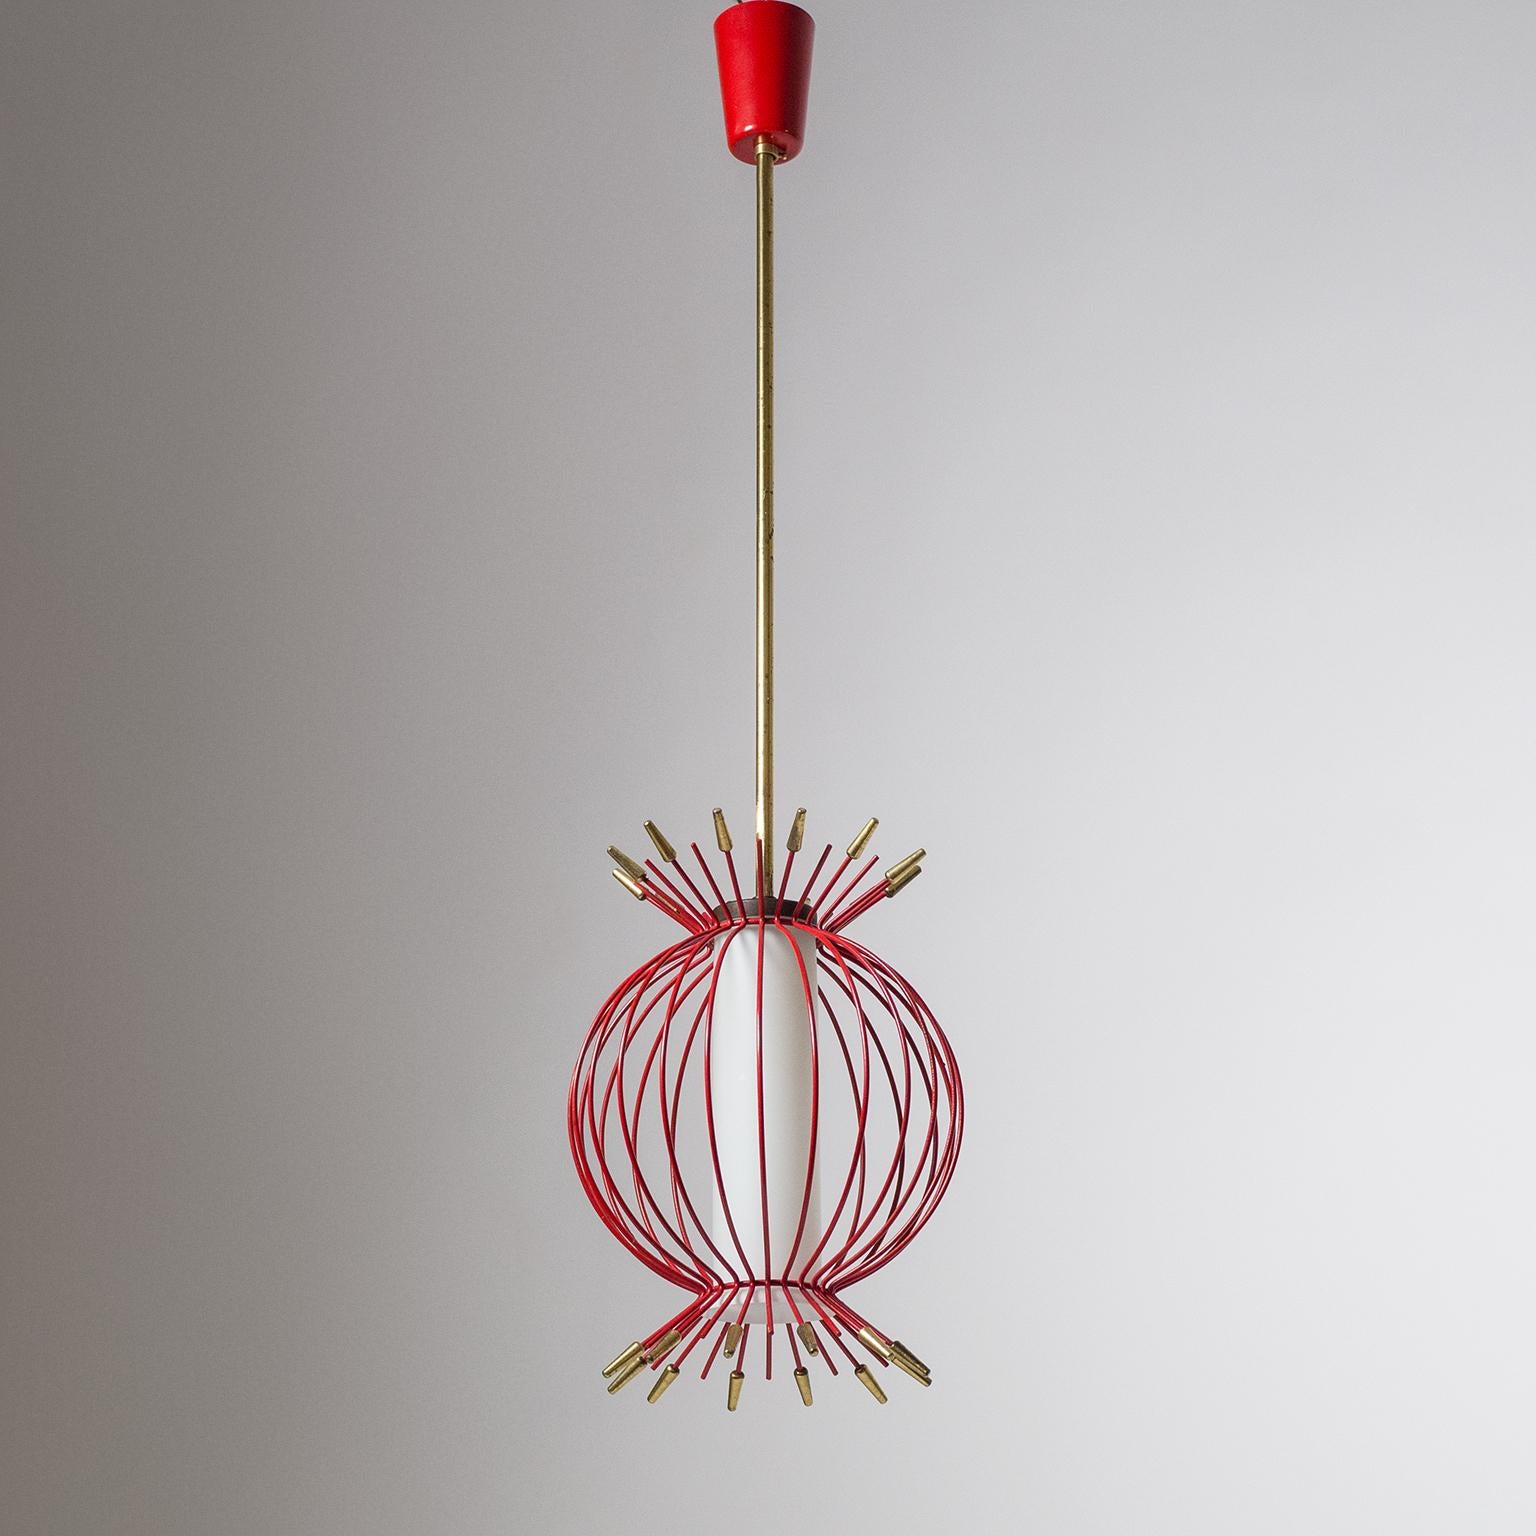 Rare and very unique midcentury pendant with a slender satin glass diffuser surrounded by a red lacquered cage with brass details. Fine original condition with patina on the brass and minor loss of paint. One brass E14 socket with new wiring. Height